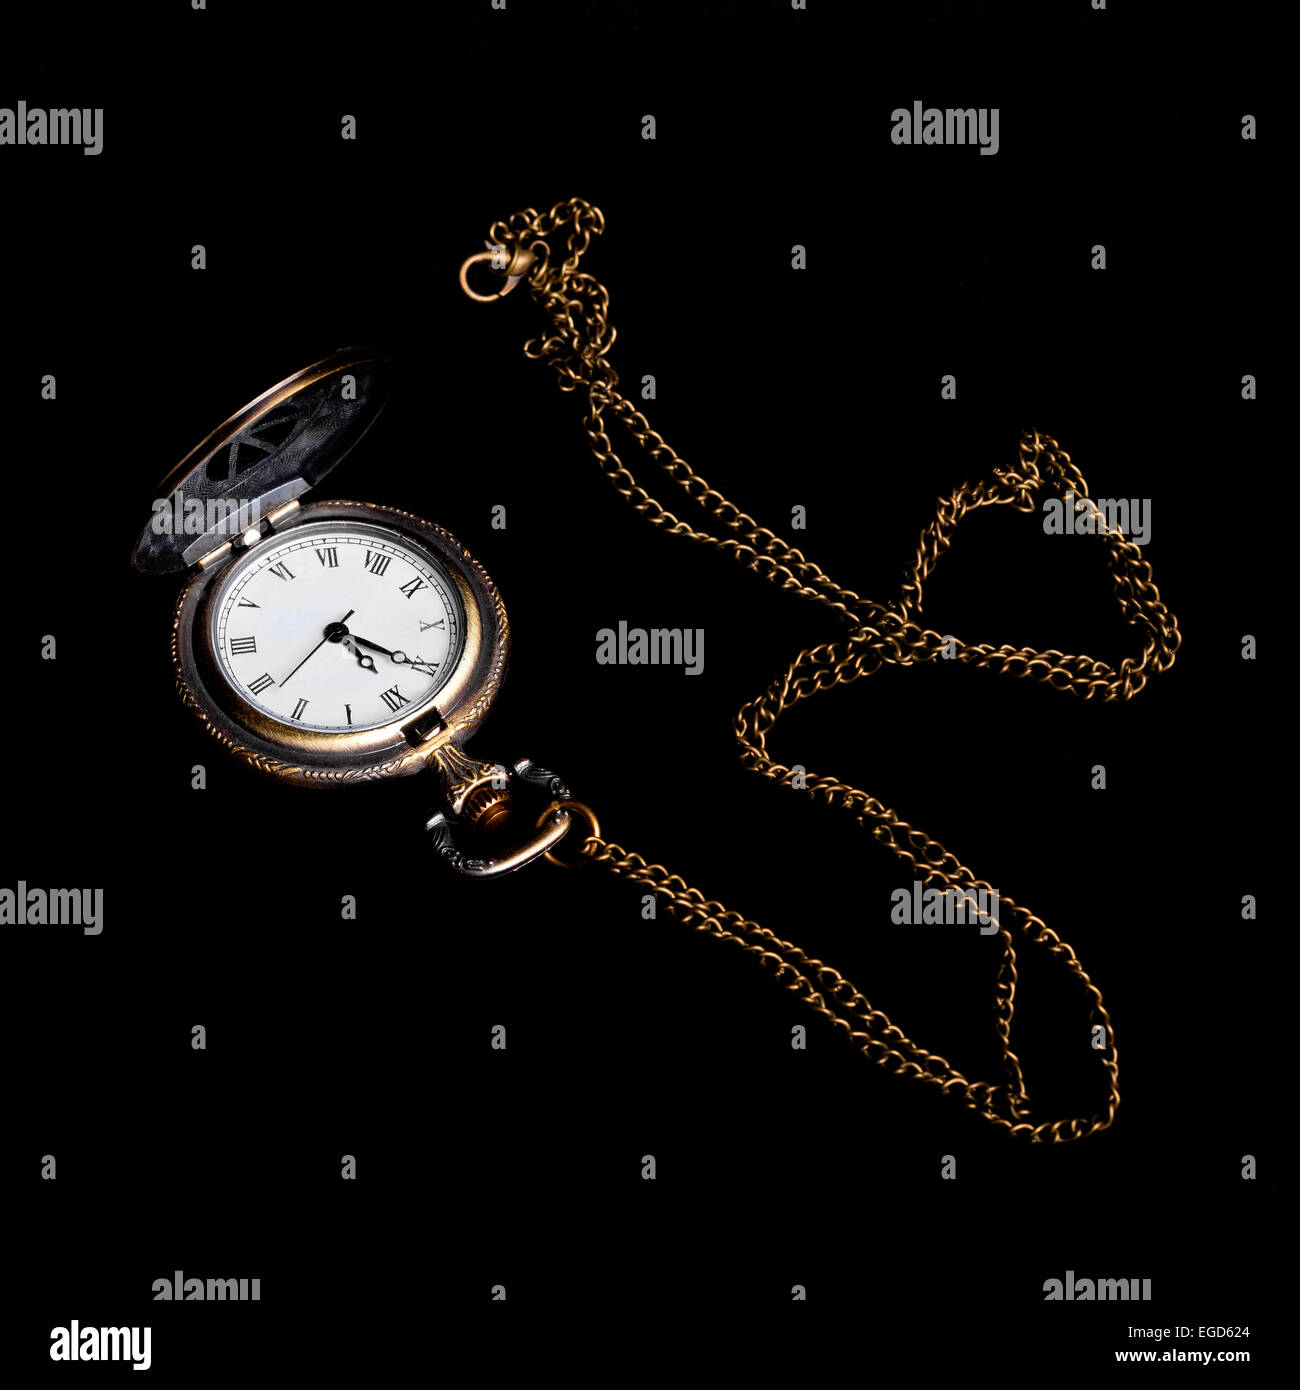 Square image of vintage watch with chain over black background Stock Photo